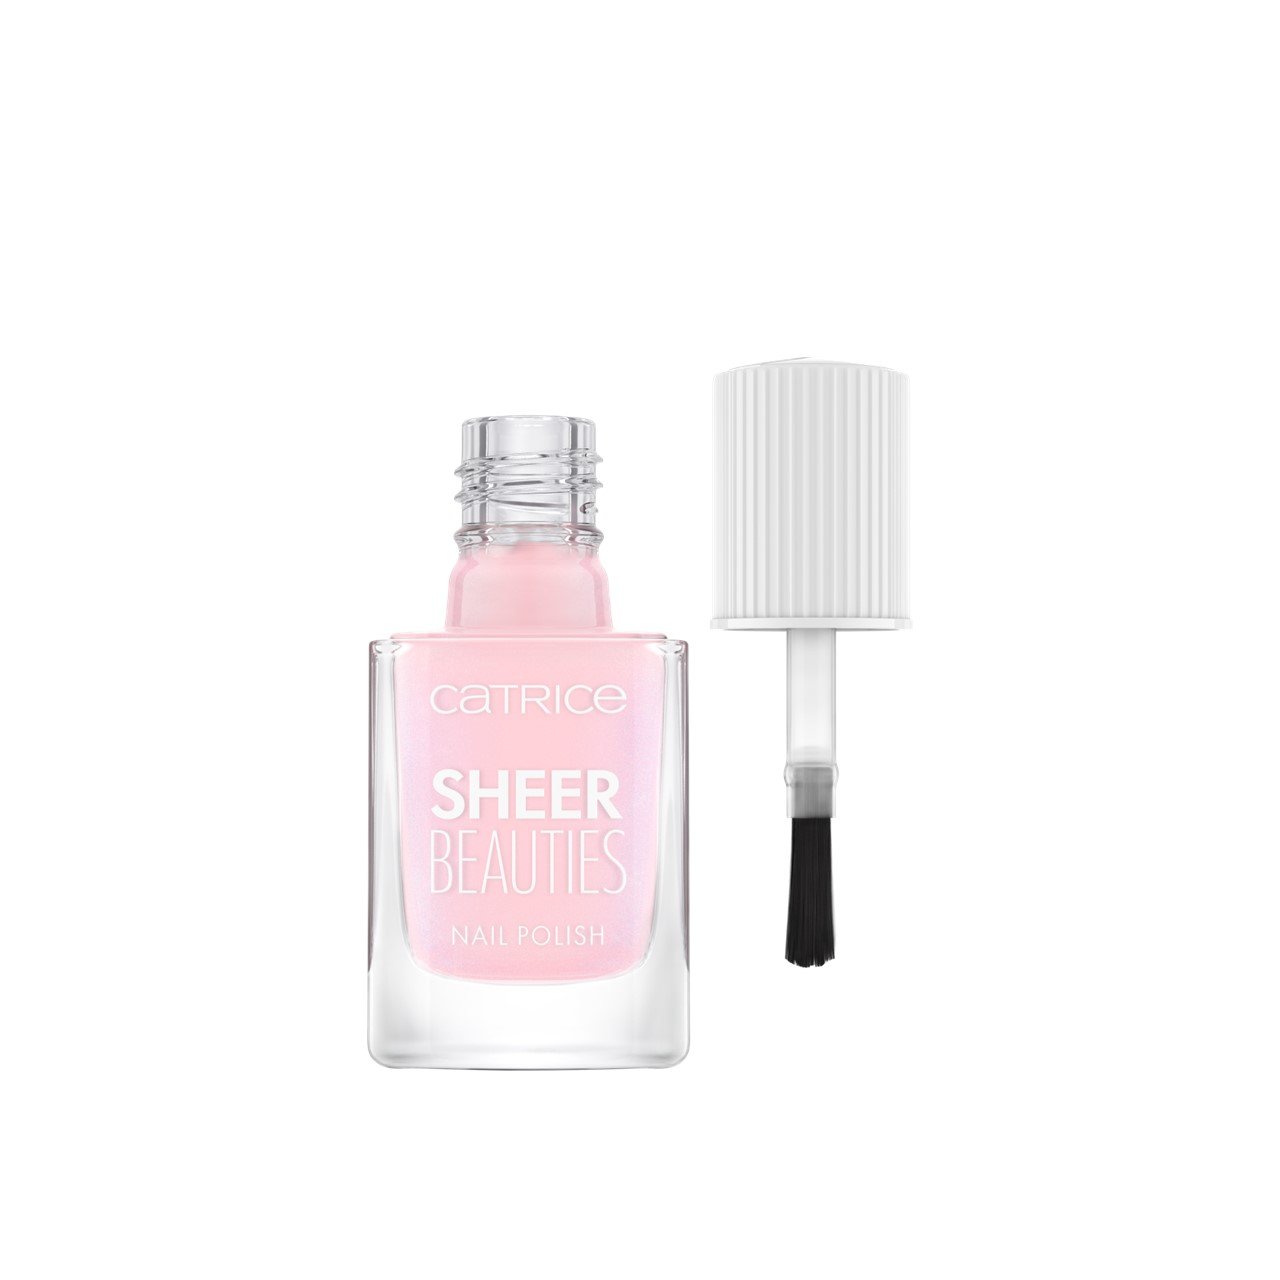 Catrice Sheer Beauties Nail Polish 040 Fluffy Cotton Candy 10.5ml (0.35 fl oz)